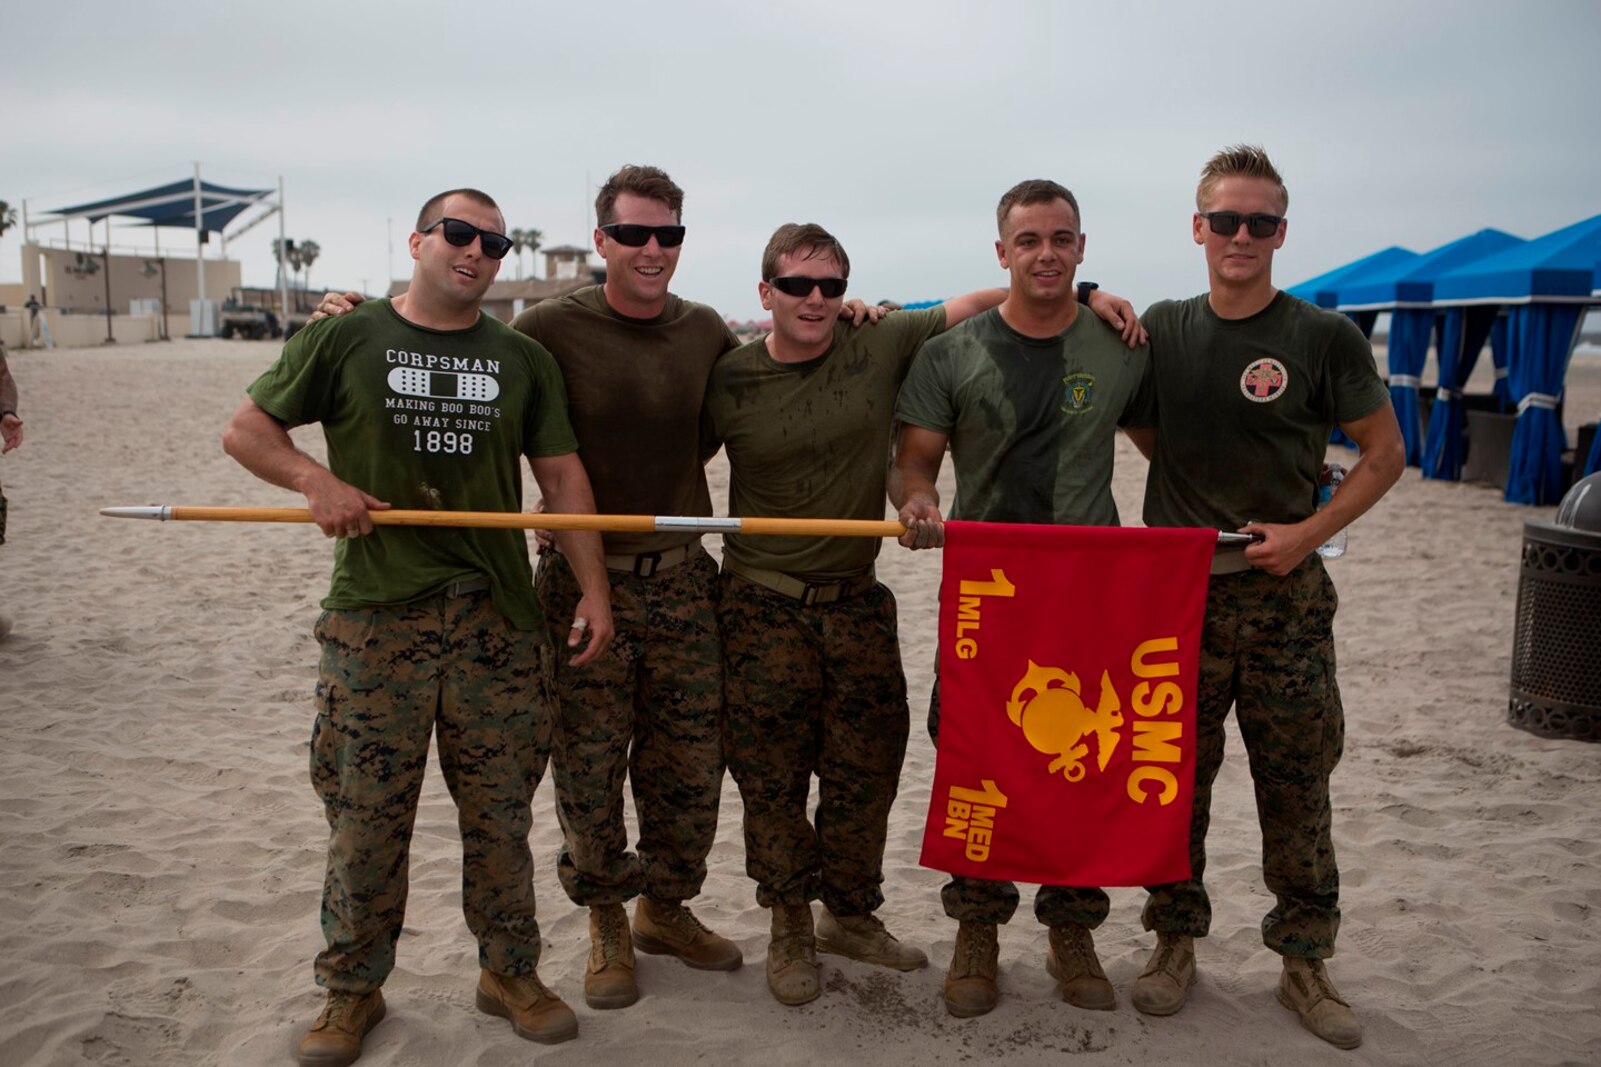 U.S. Navy (from left to right) Petty Officer Third Class John Jessie, Stefan Herrstrom, Jarrett Orich, Cody Carroll and Petty Officer Second Class Stephen Henderson, Corpsmen with 1st Medical Battalion, 1st Marine Logistics Group, pose with their unit guidon after completing the North County Corpsman Cup on Camp Pendleton, Calif., June 16, 2017. The North County Corpsman Cup is designed to test the knowledge, physical readiness and teamwork of each participating sailor while promoting esprit de corps among the Hospital Corpsman community. (U.S. Marine Corps photo by Lance Cpl. Joseph Sorci)